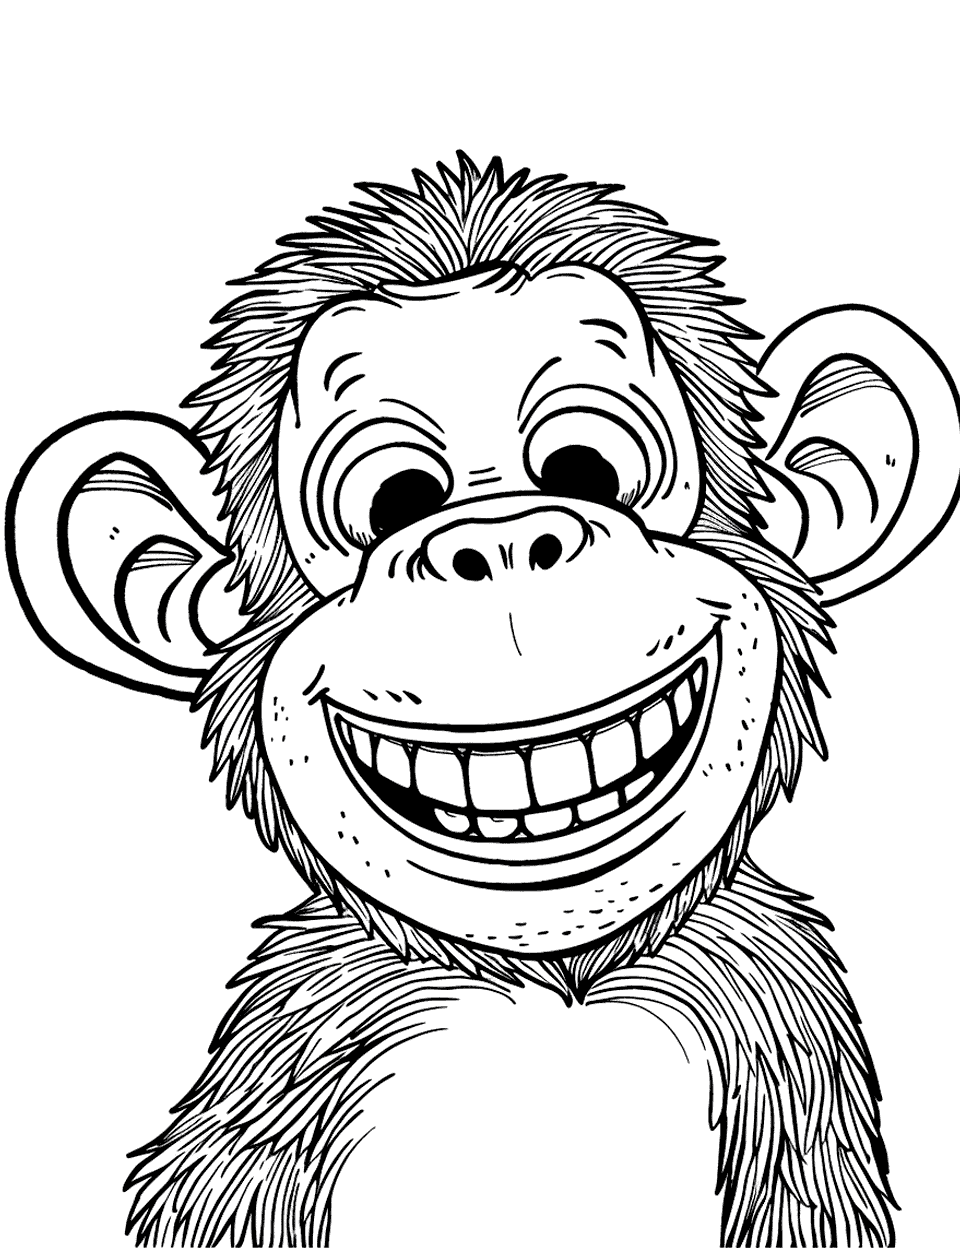 Laughing Monkey Coloring Page - A monkey with a wide grin, appearing as if it’s laughing.